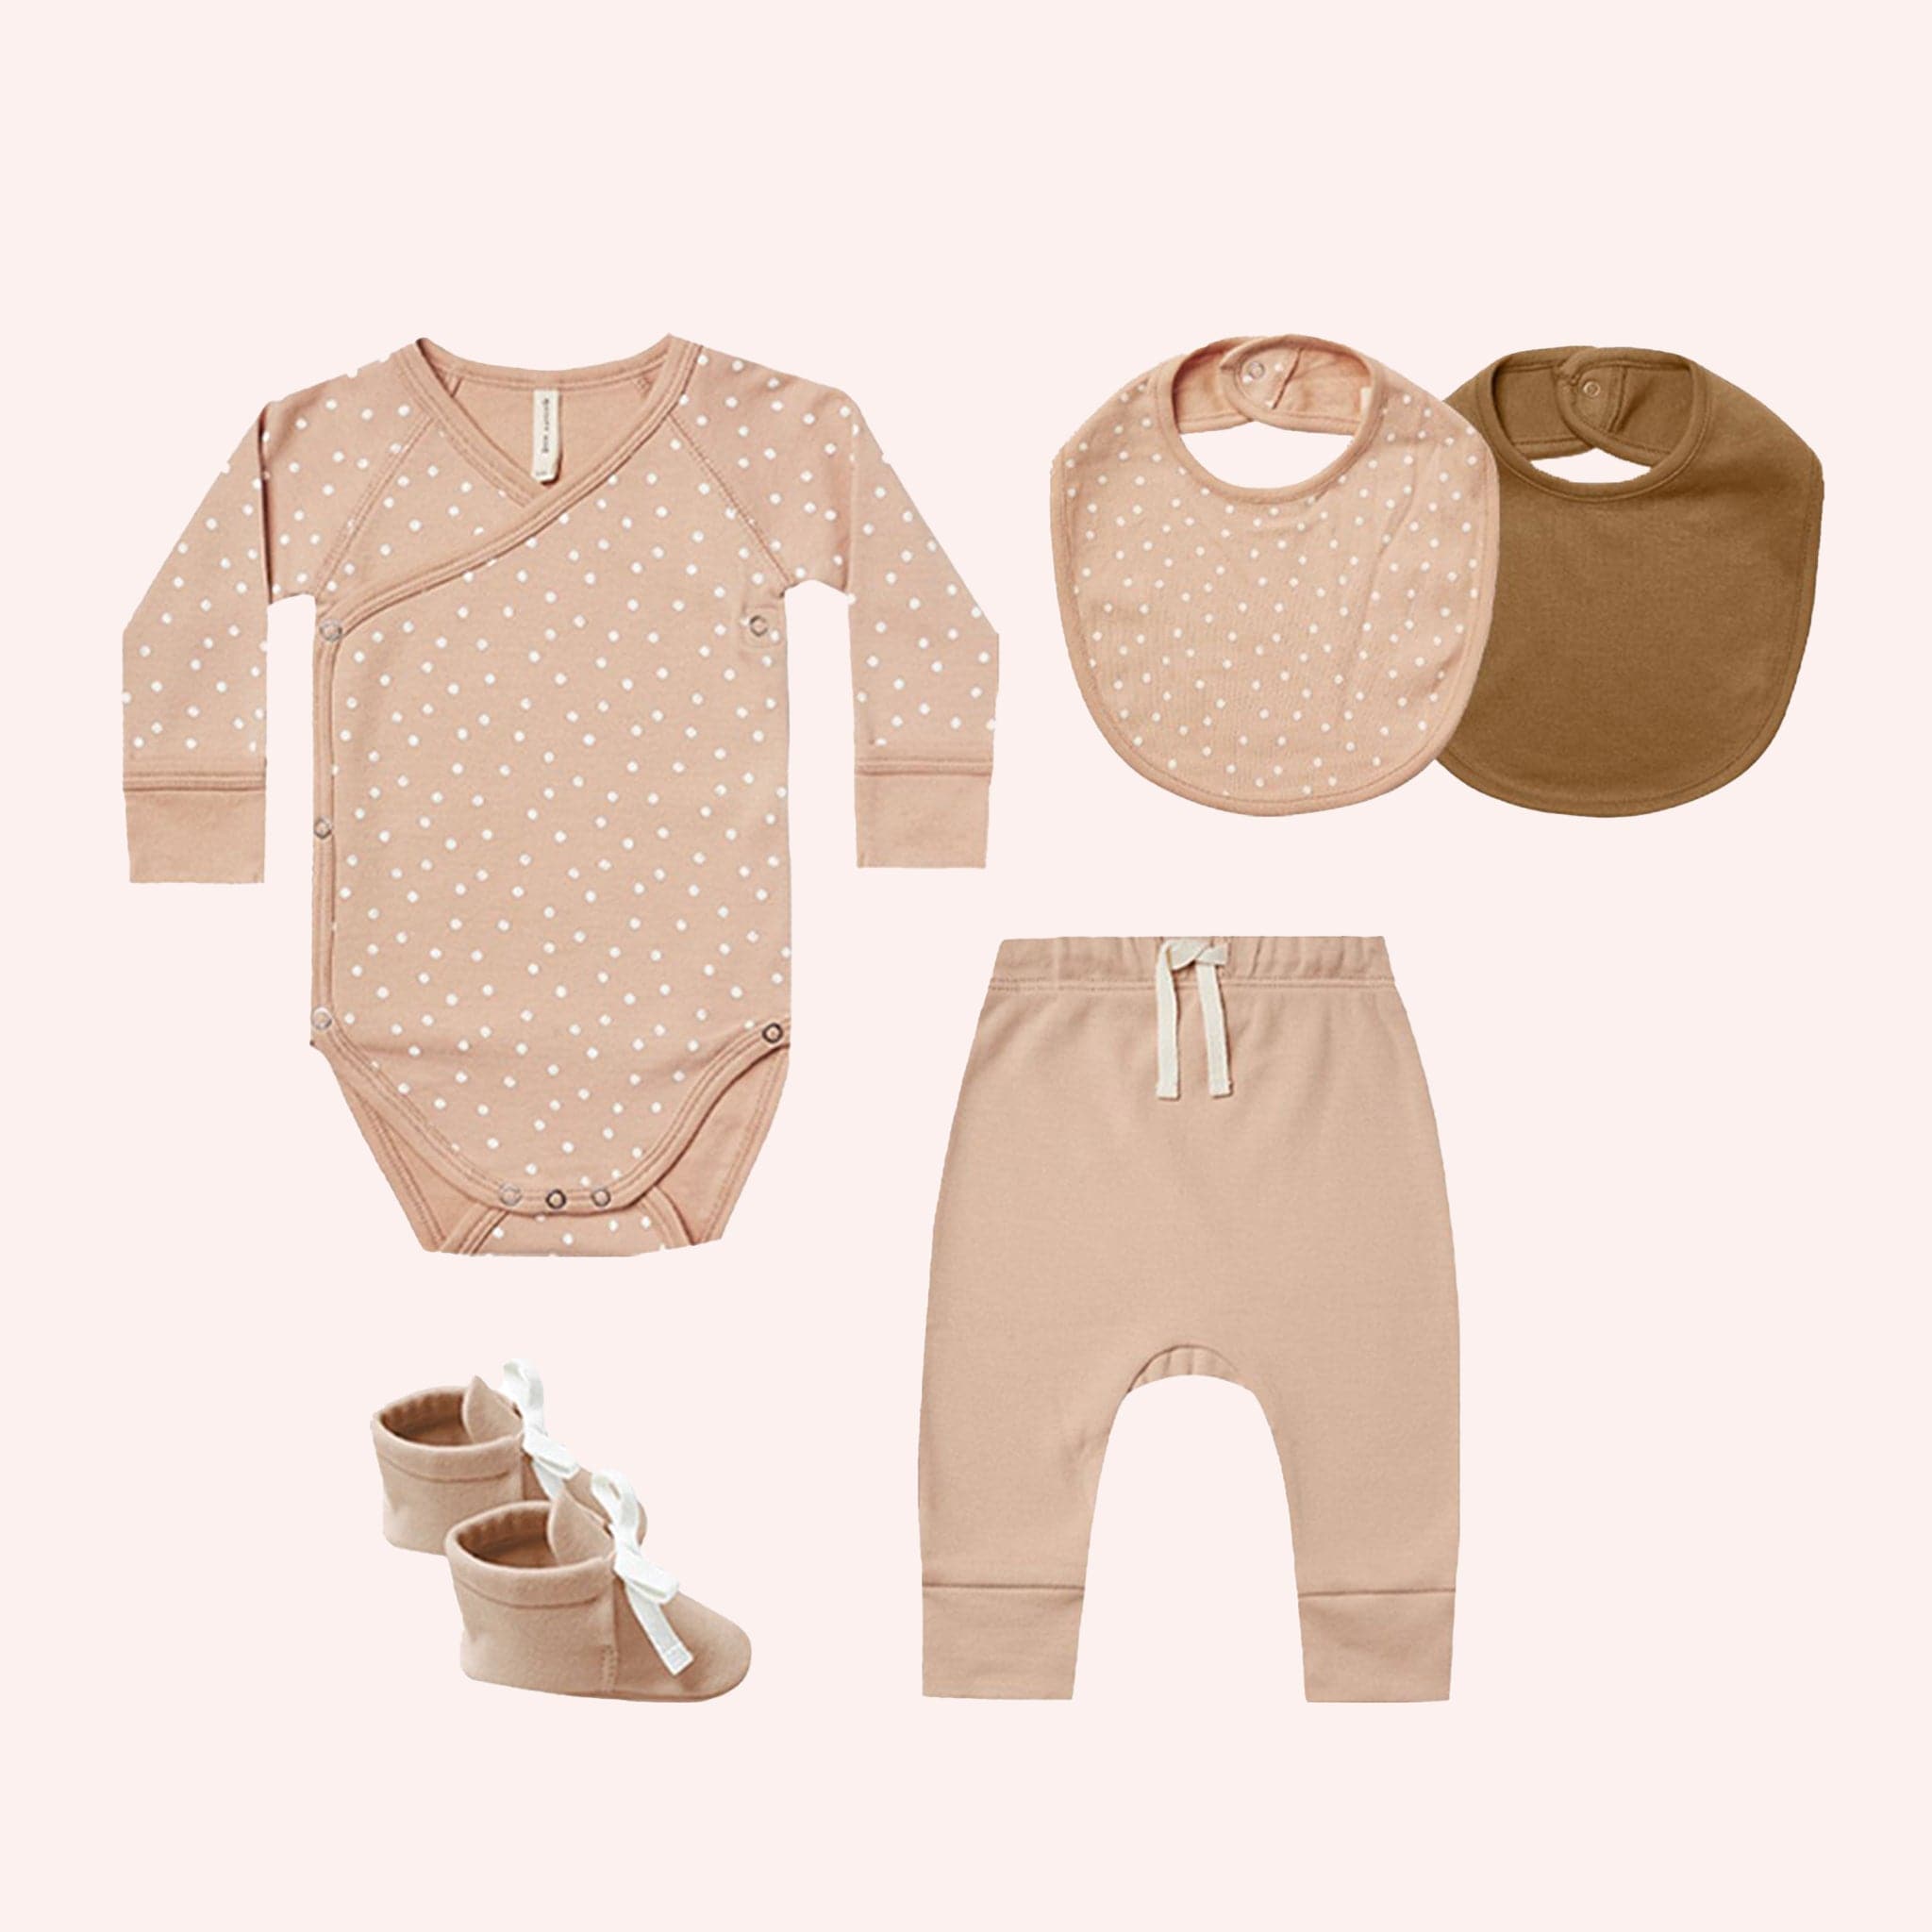 A baby clothing set. A long sleeve onesie in blush pink with white polka dots. A blush bib with white polka dots, a brown bib. Blush pink joggers with white drawstring. Blush booties with white lace ties.